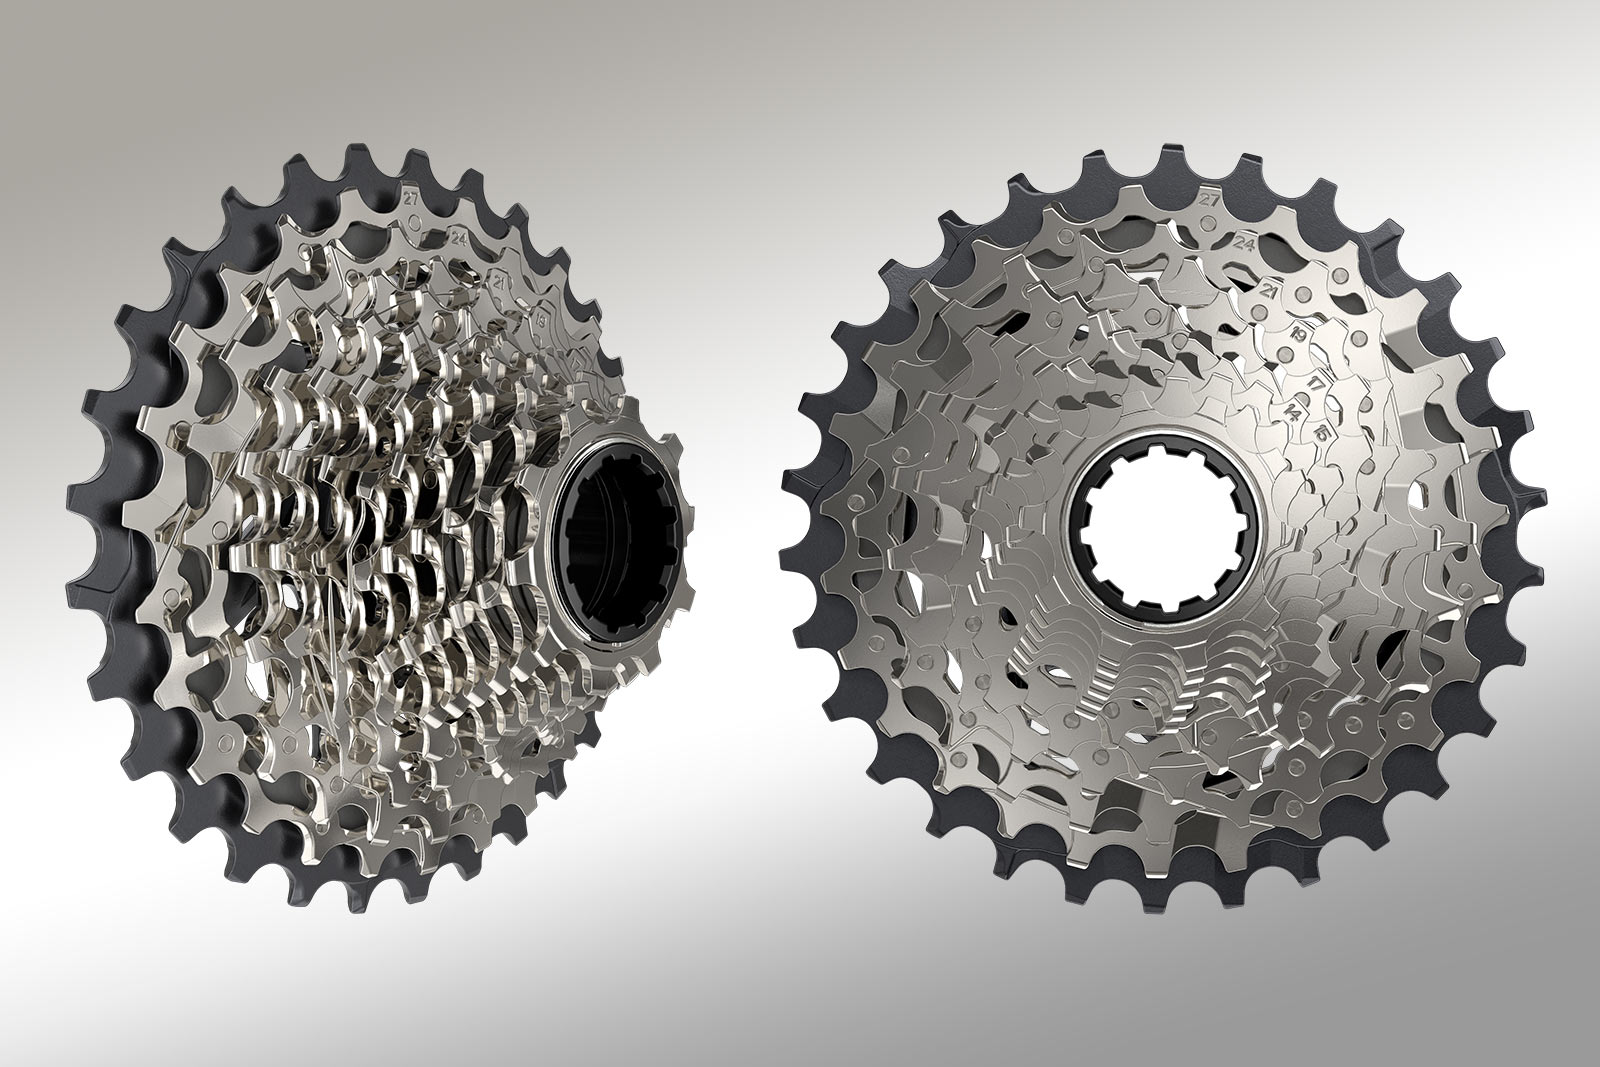 new 10-30 sram force XG-1270 12-speed cassette shown from the front and side angles